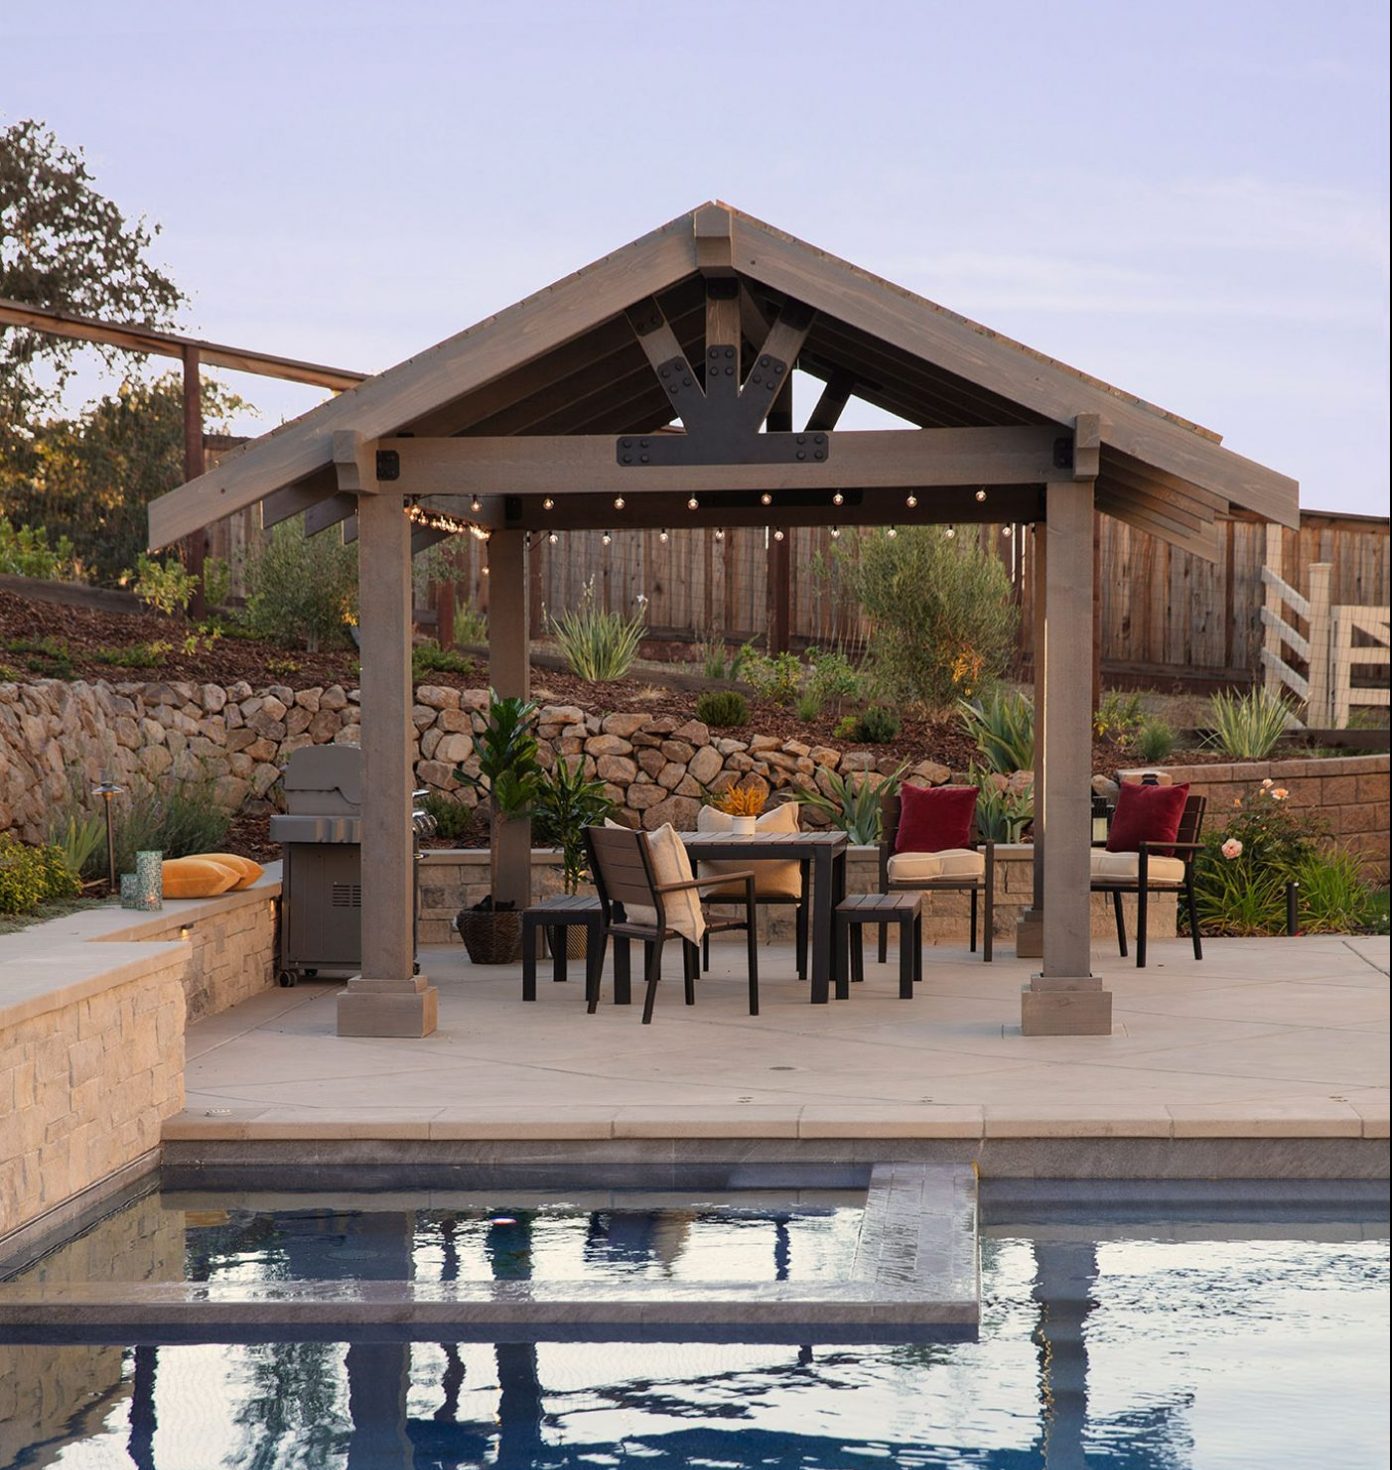 Wooden pergola with chairs and table next the swimming pool. Picture taken at dusk.